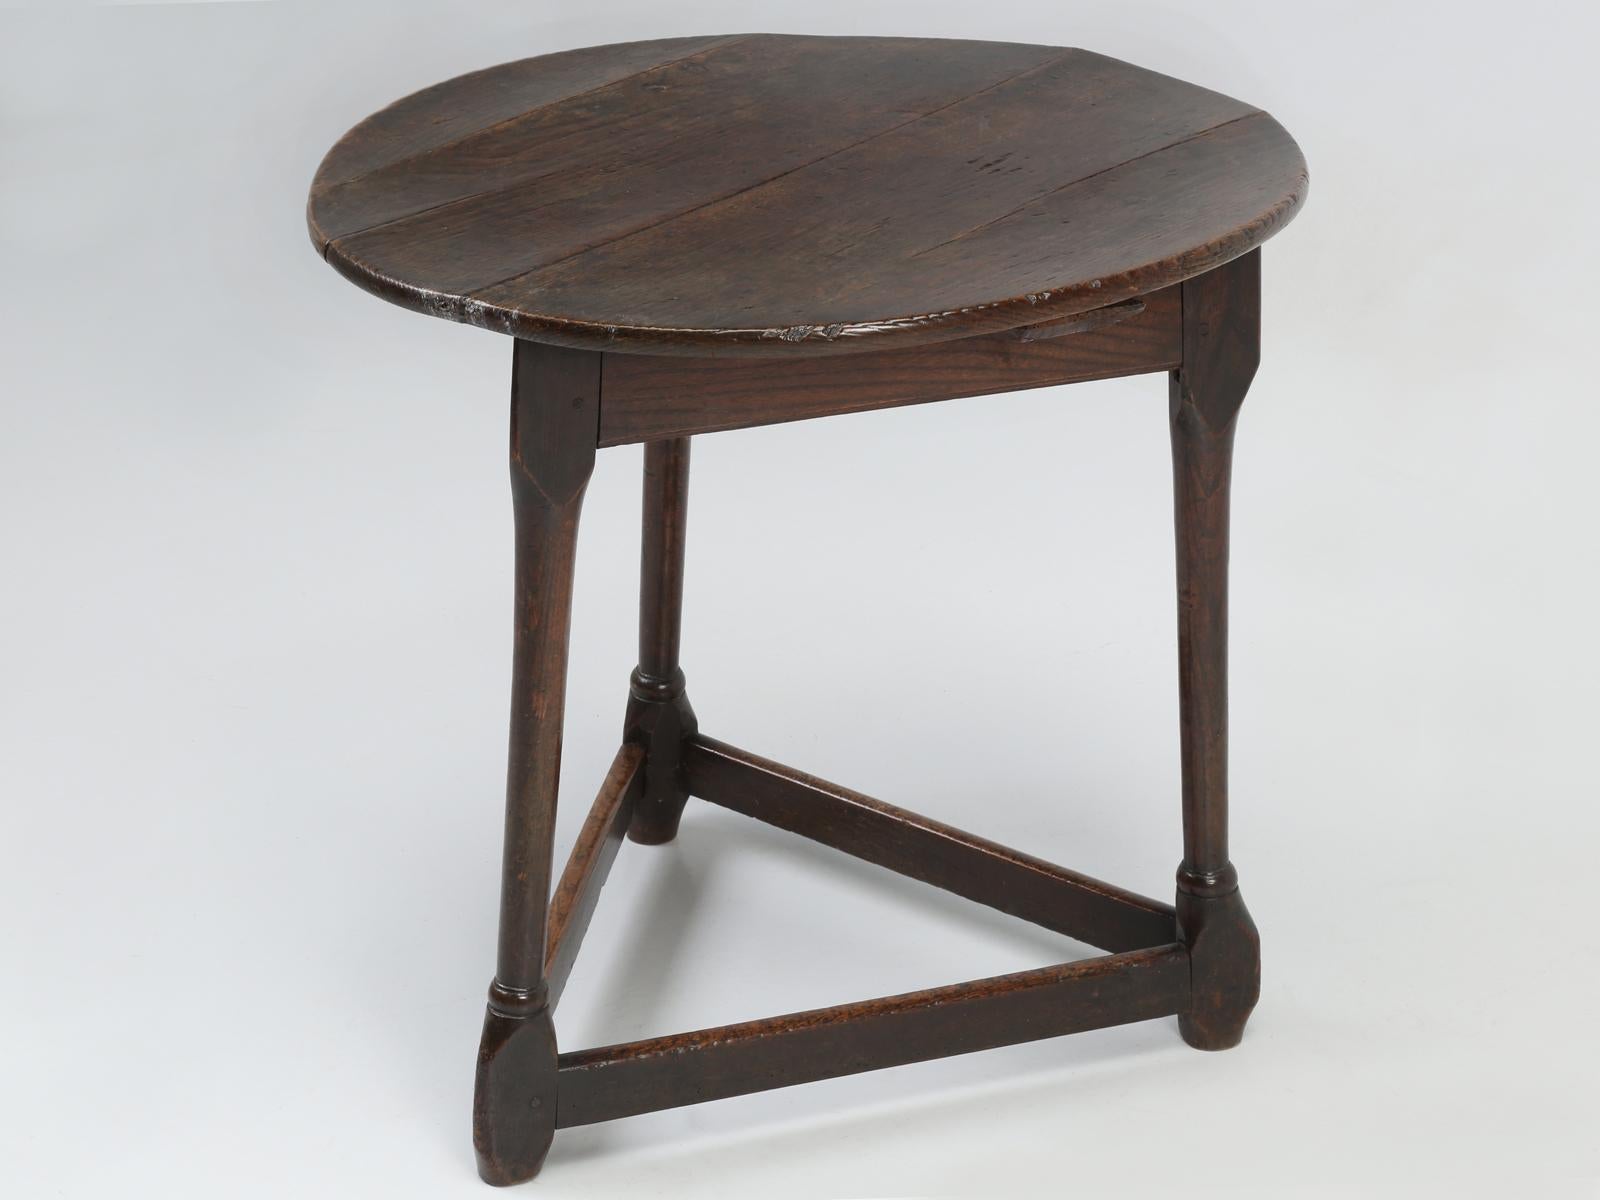 This is a great un-restored antique English cricket table and when we started buying English antiques circa 30-years ago, these were quite common. Now, trying to find an un-restored antique English cricket table, with a sensational original patina,